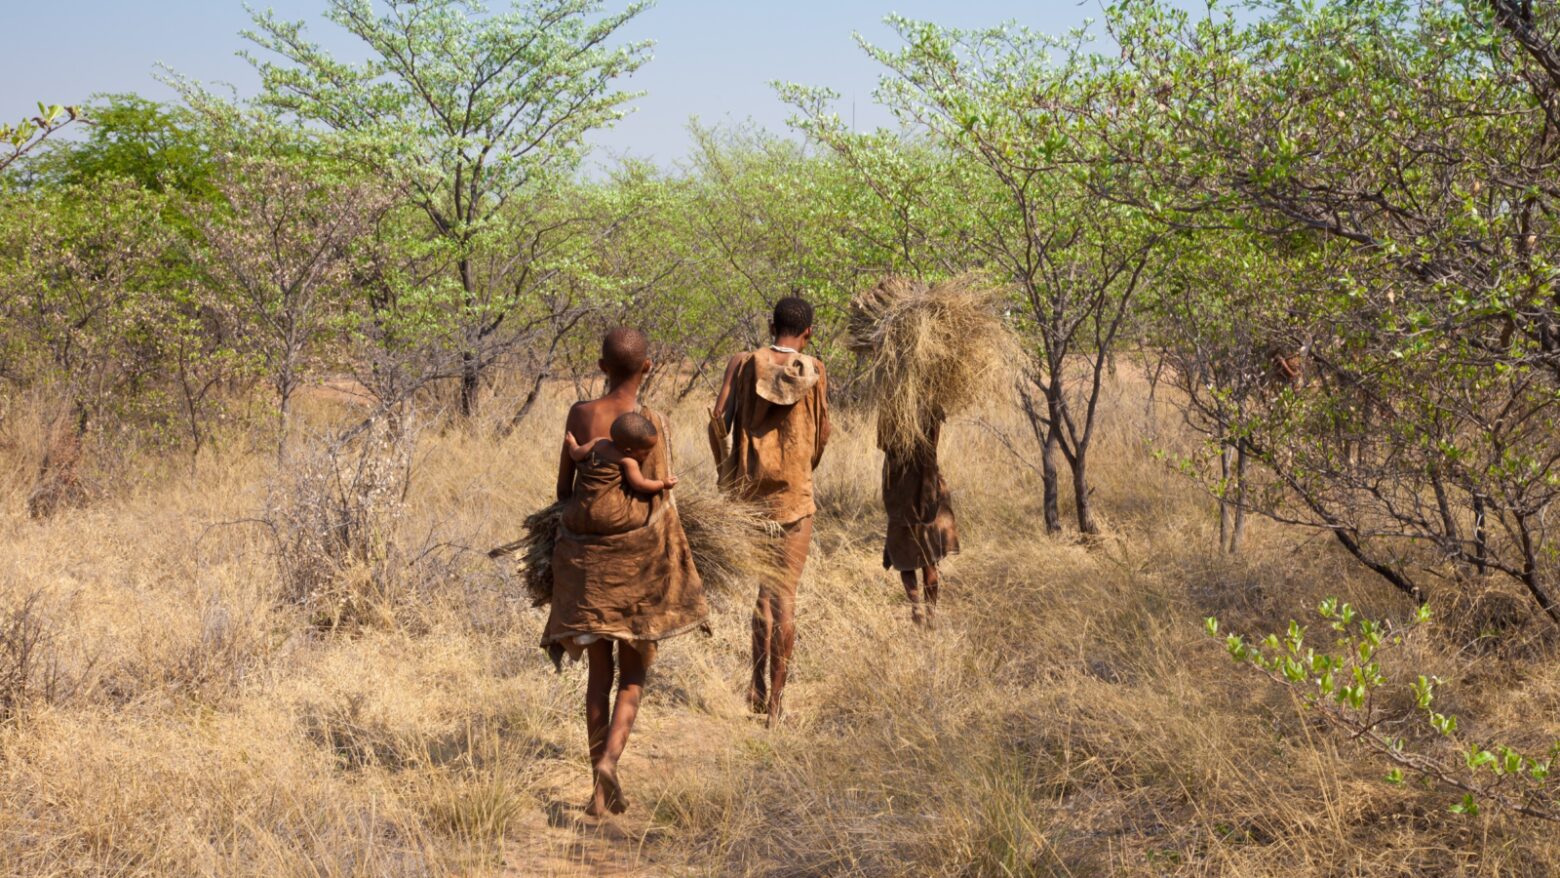 Family of hunter-gatherers in Africa walking home through a field of dried grass and green trees.